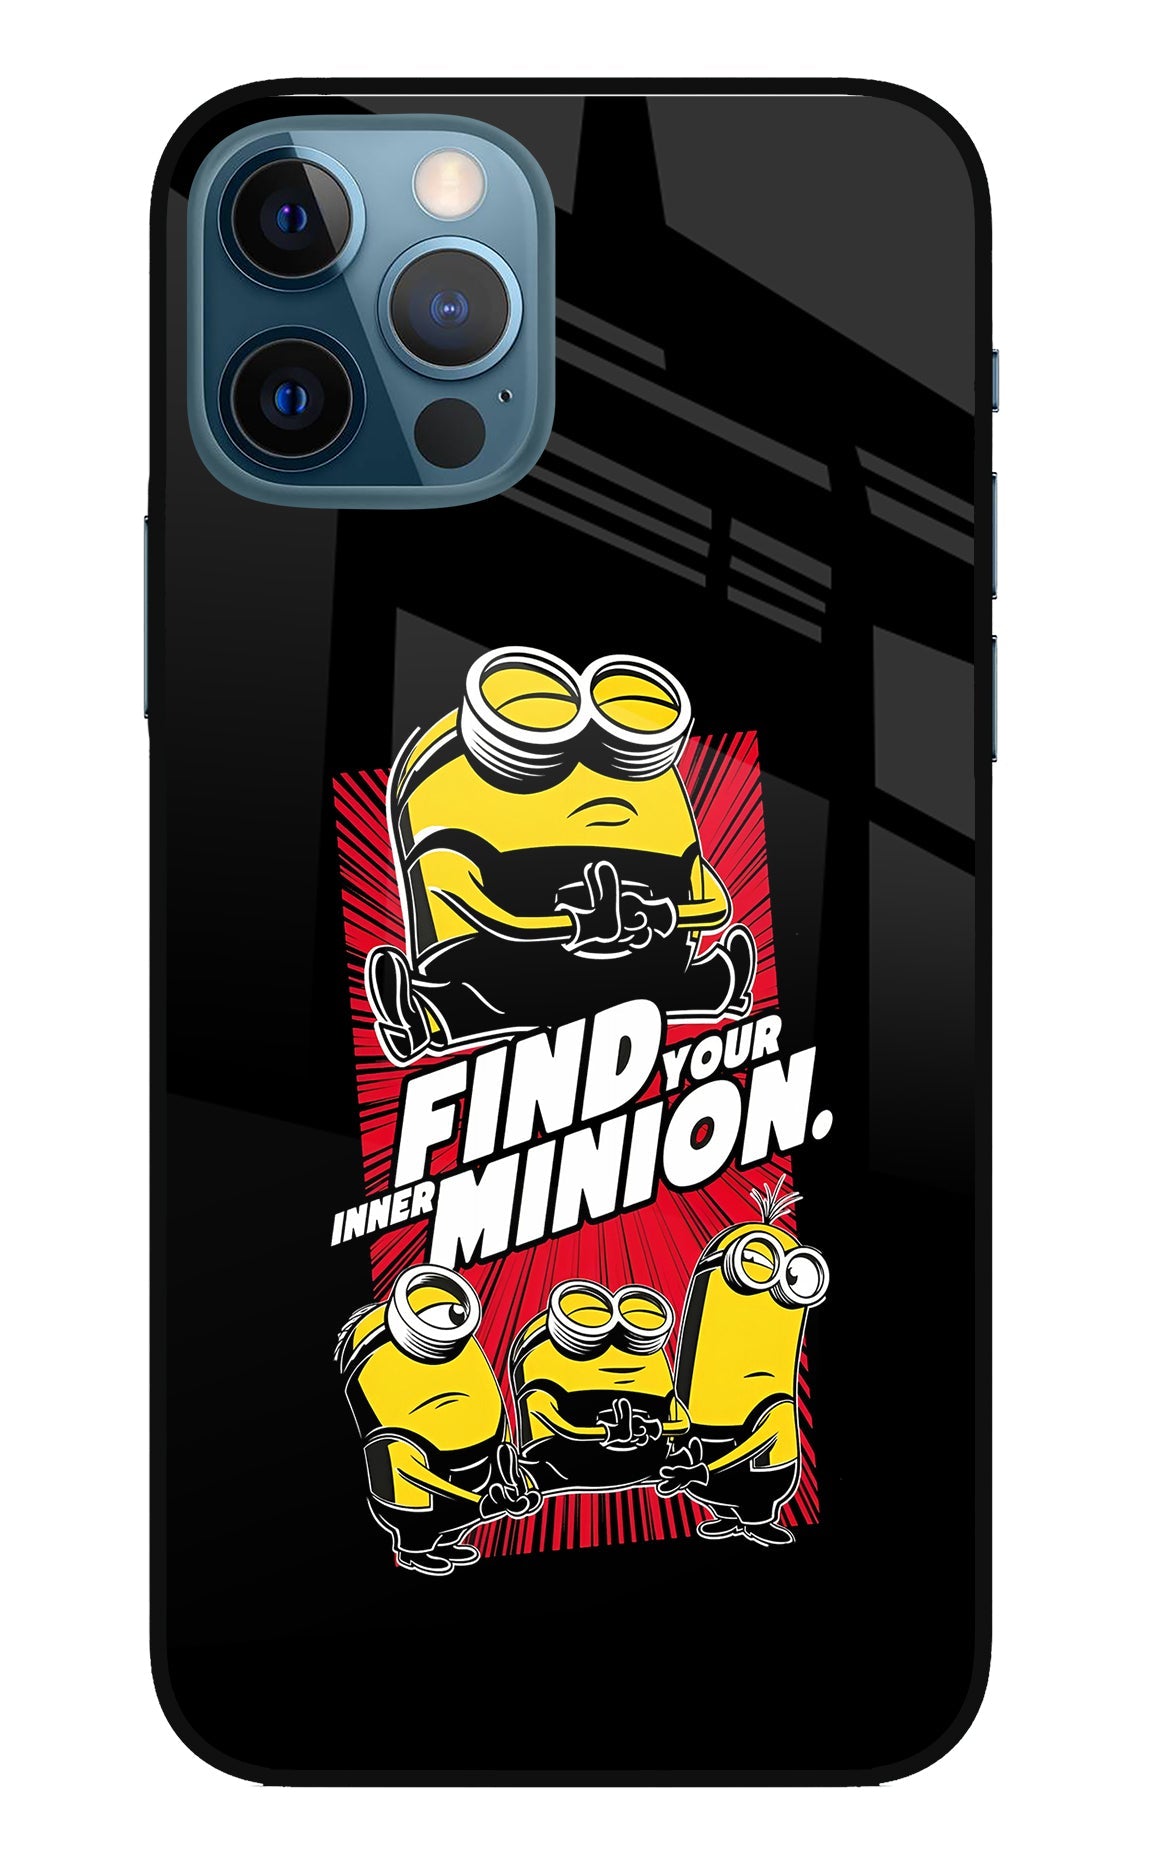 Find your inner Minion iPhone 12 Pro Glass Case